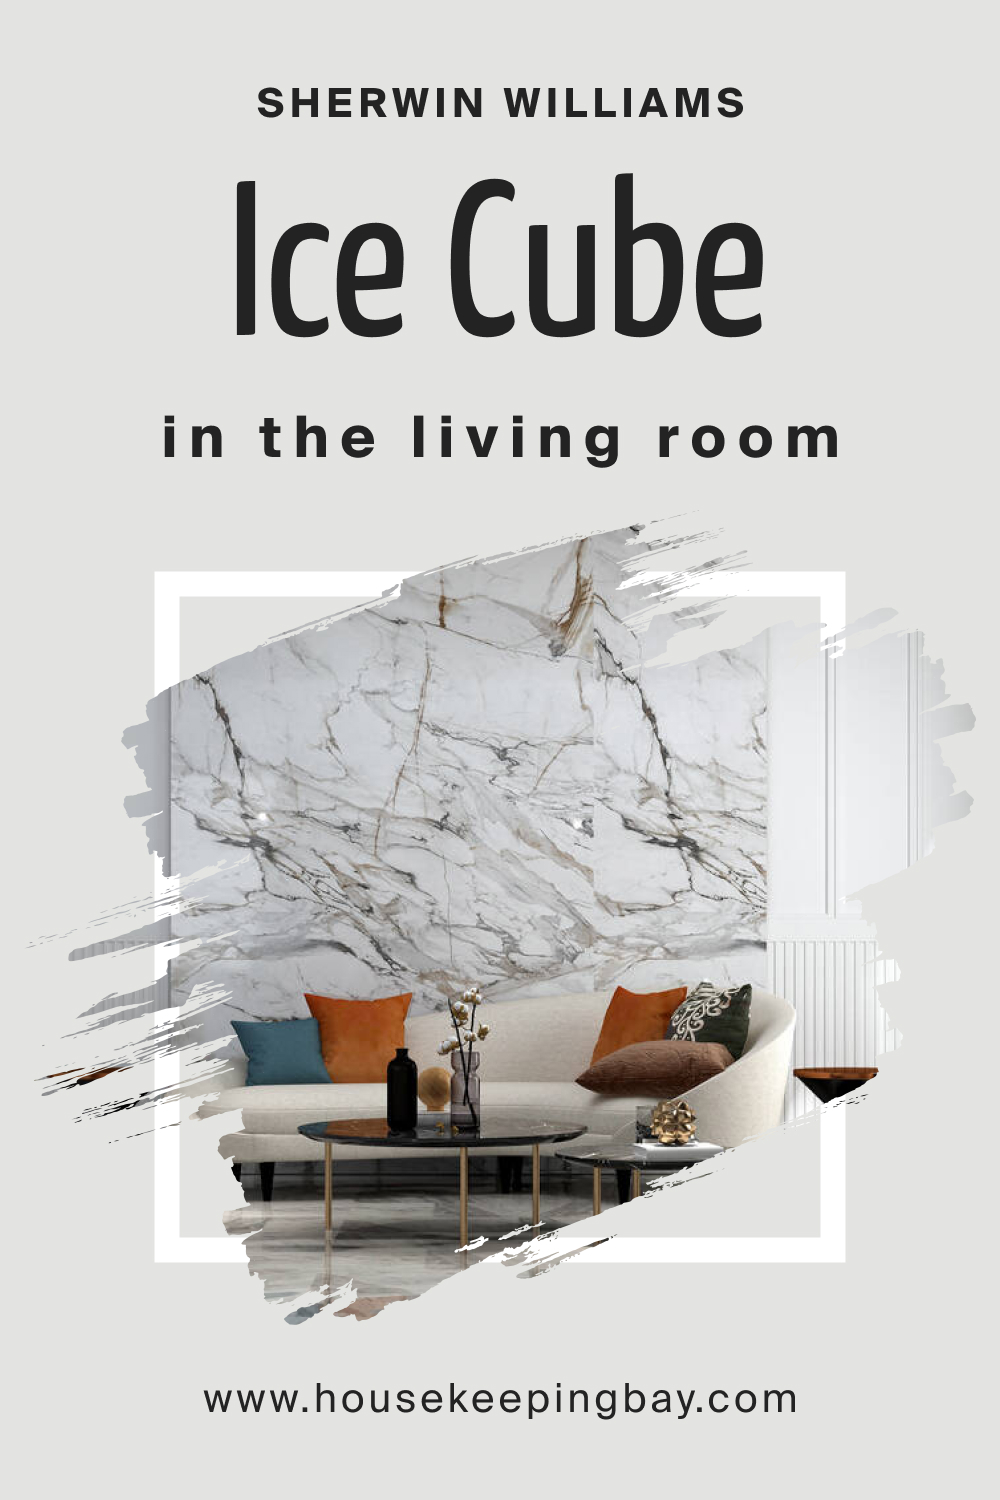 Sherwin Williams. SW 6252 Ice Cube In the Living Room